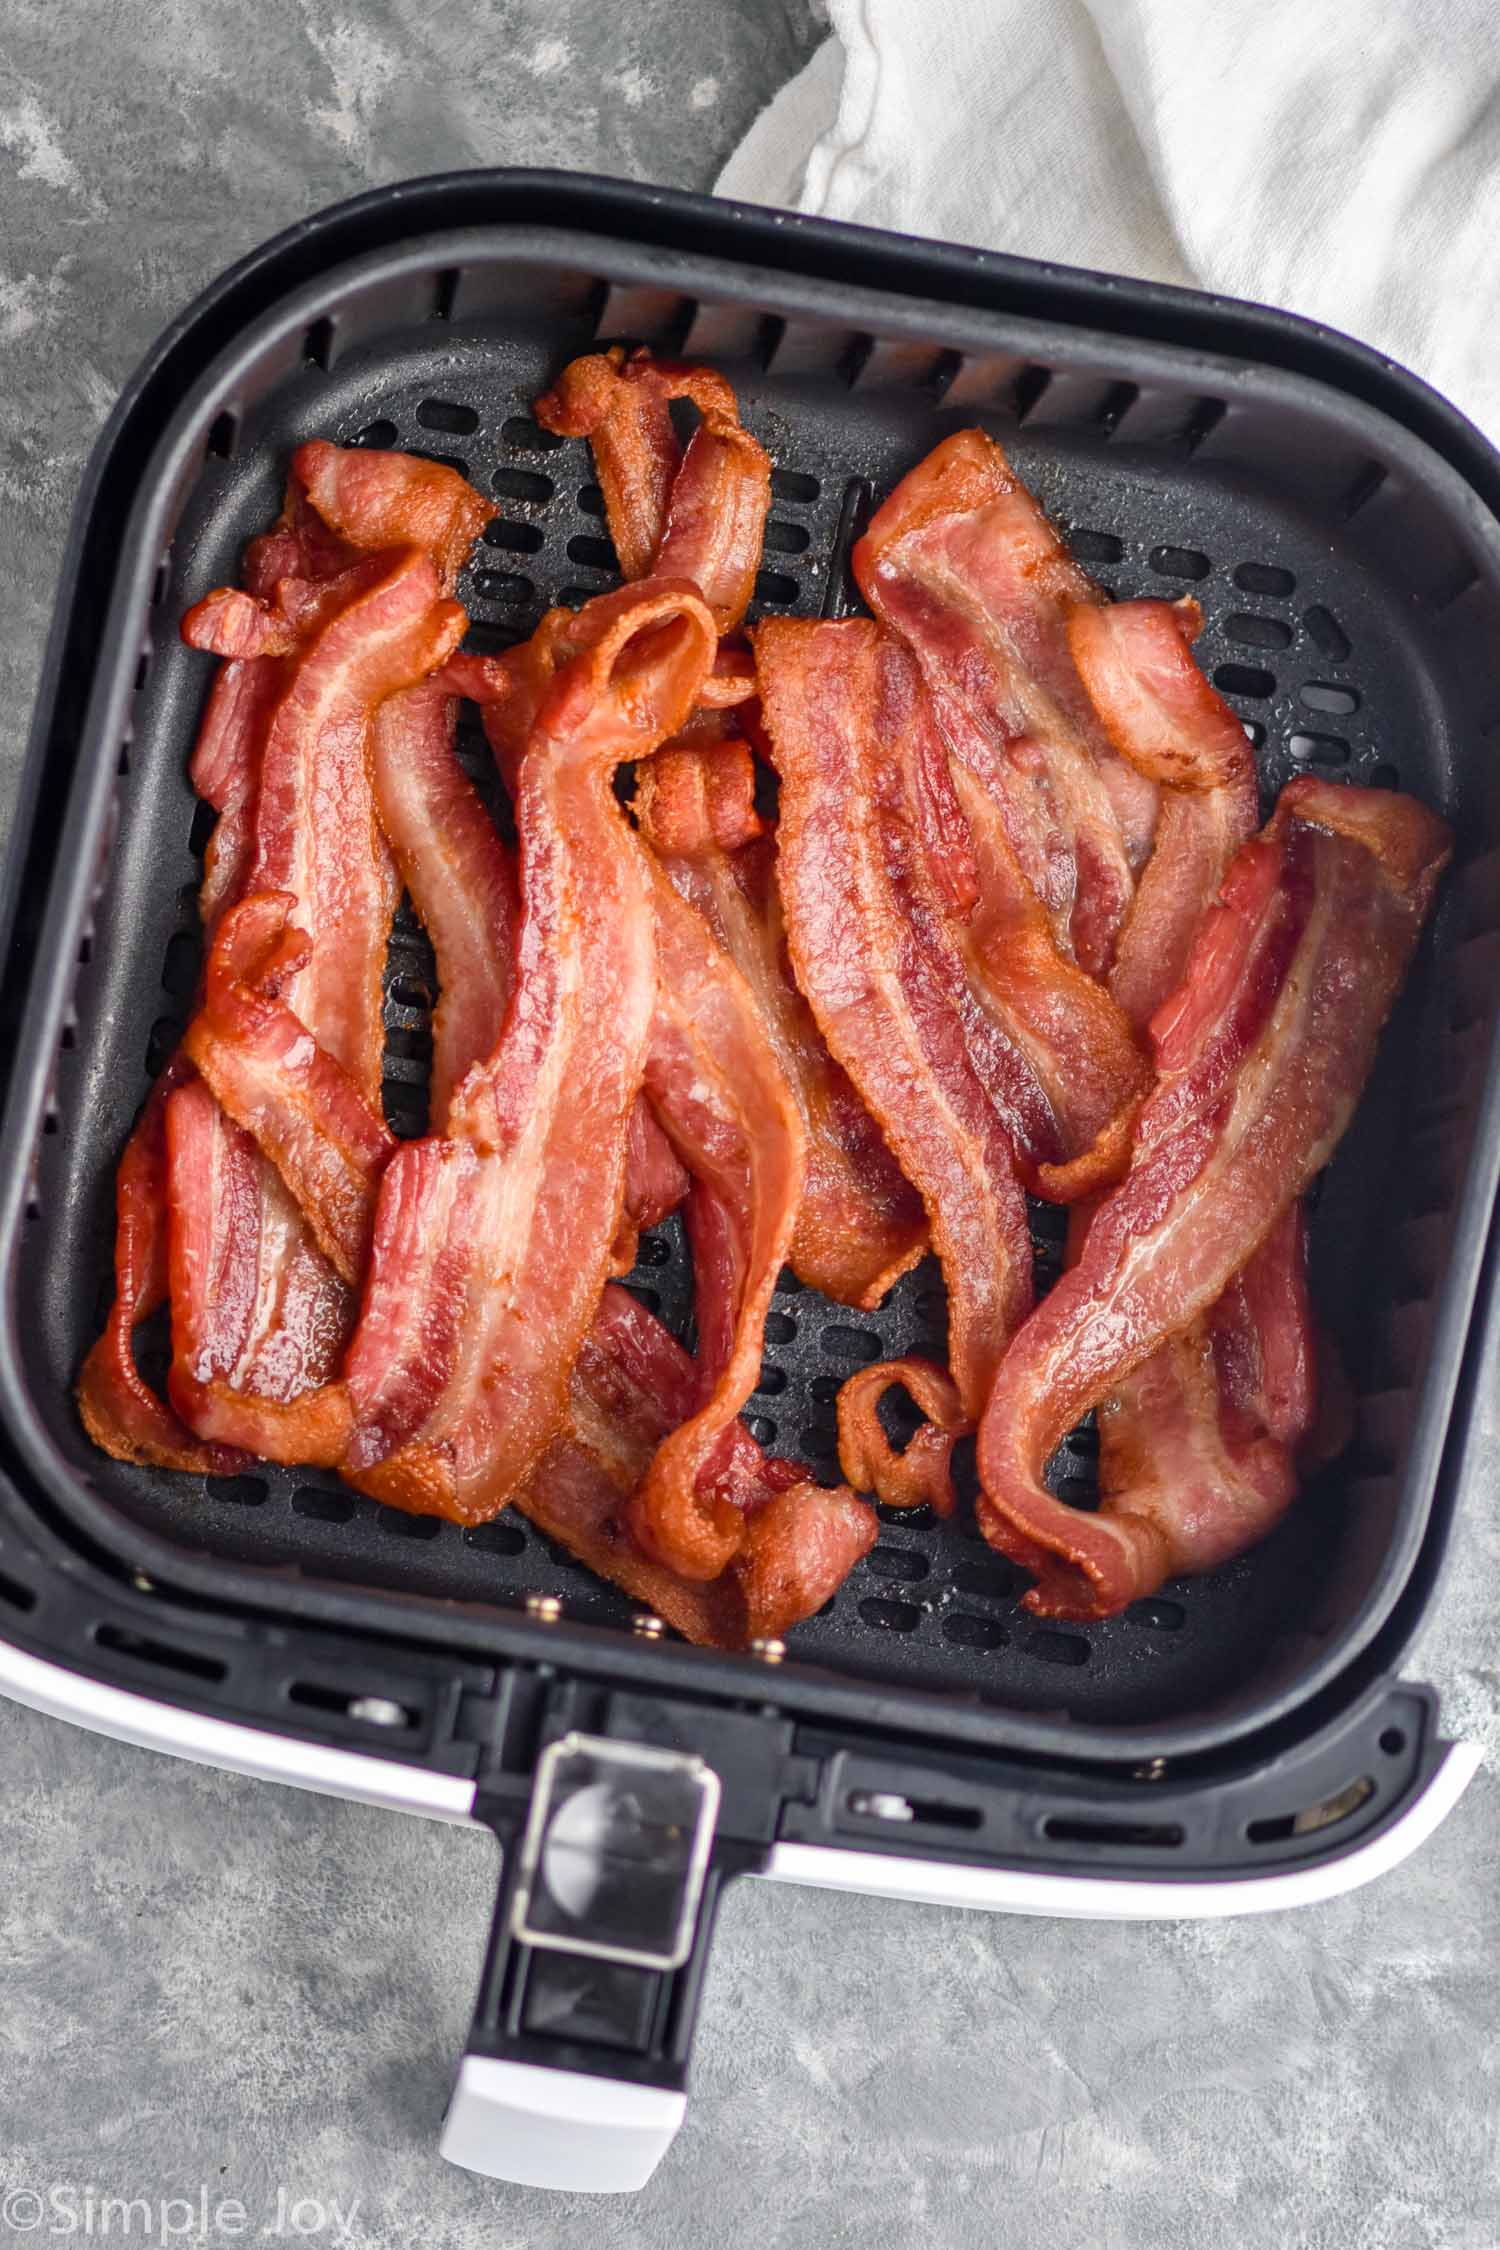 Overhead photo of cooked strips of bacon in air fryer basket for air fryer bacon.